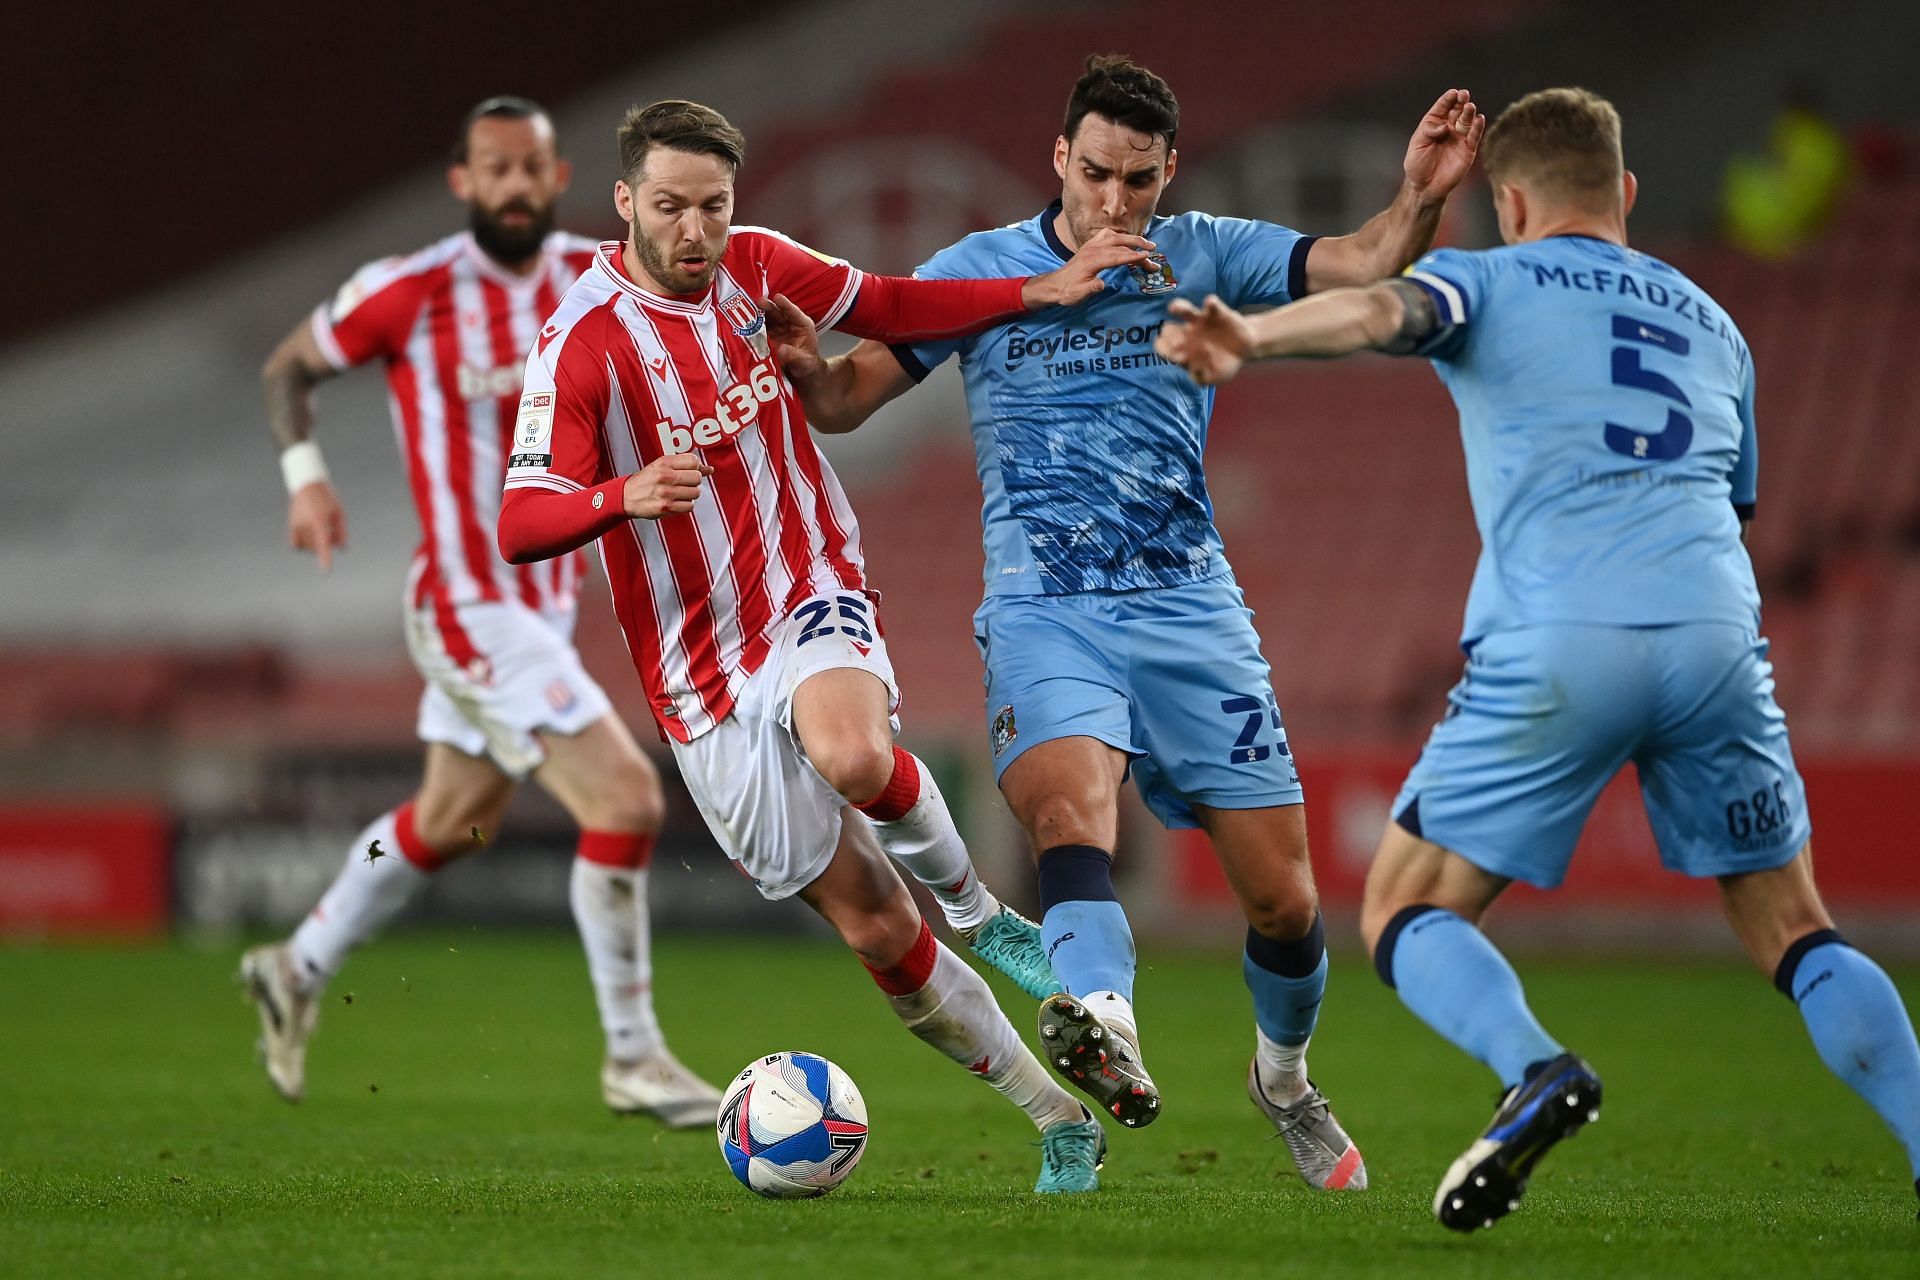 Coventry City play host to Stoke City on Tuesday